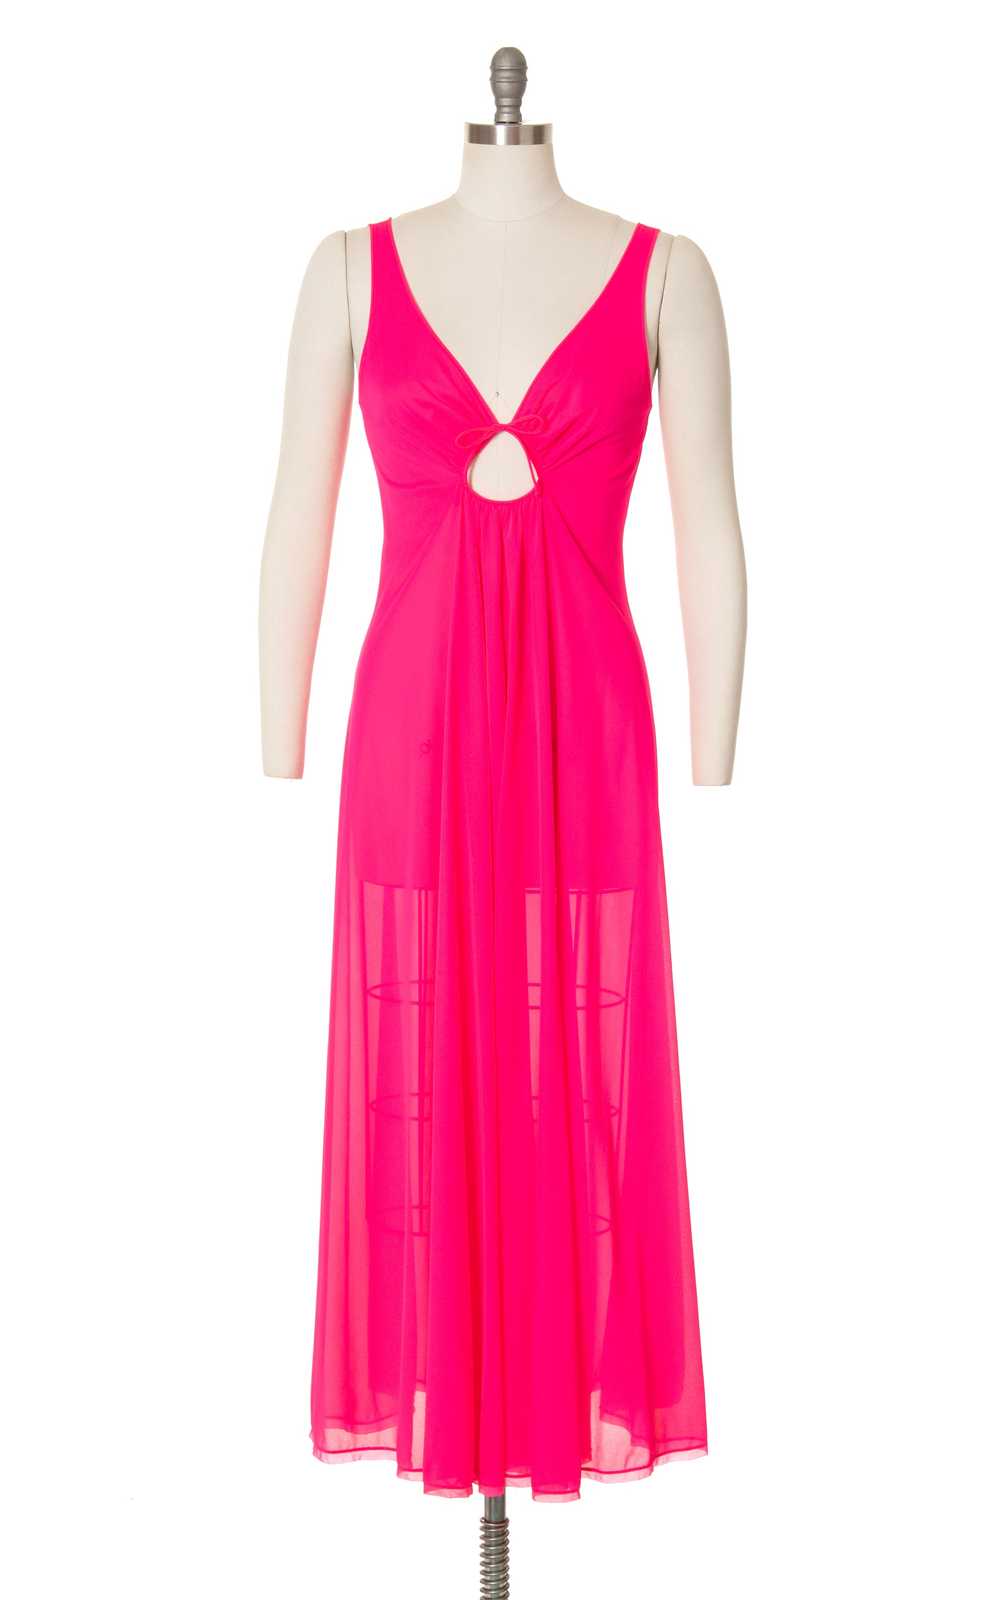 1970s Neon Hot Pink Nightgown | small/medium/large - image 4